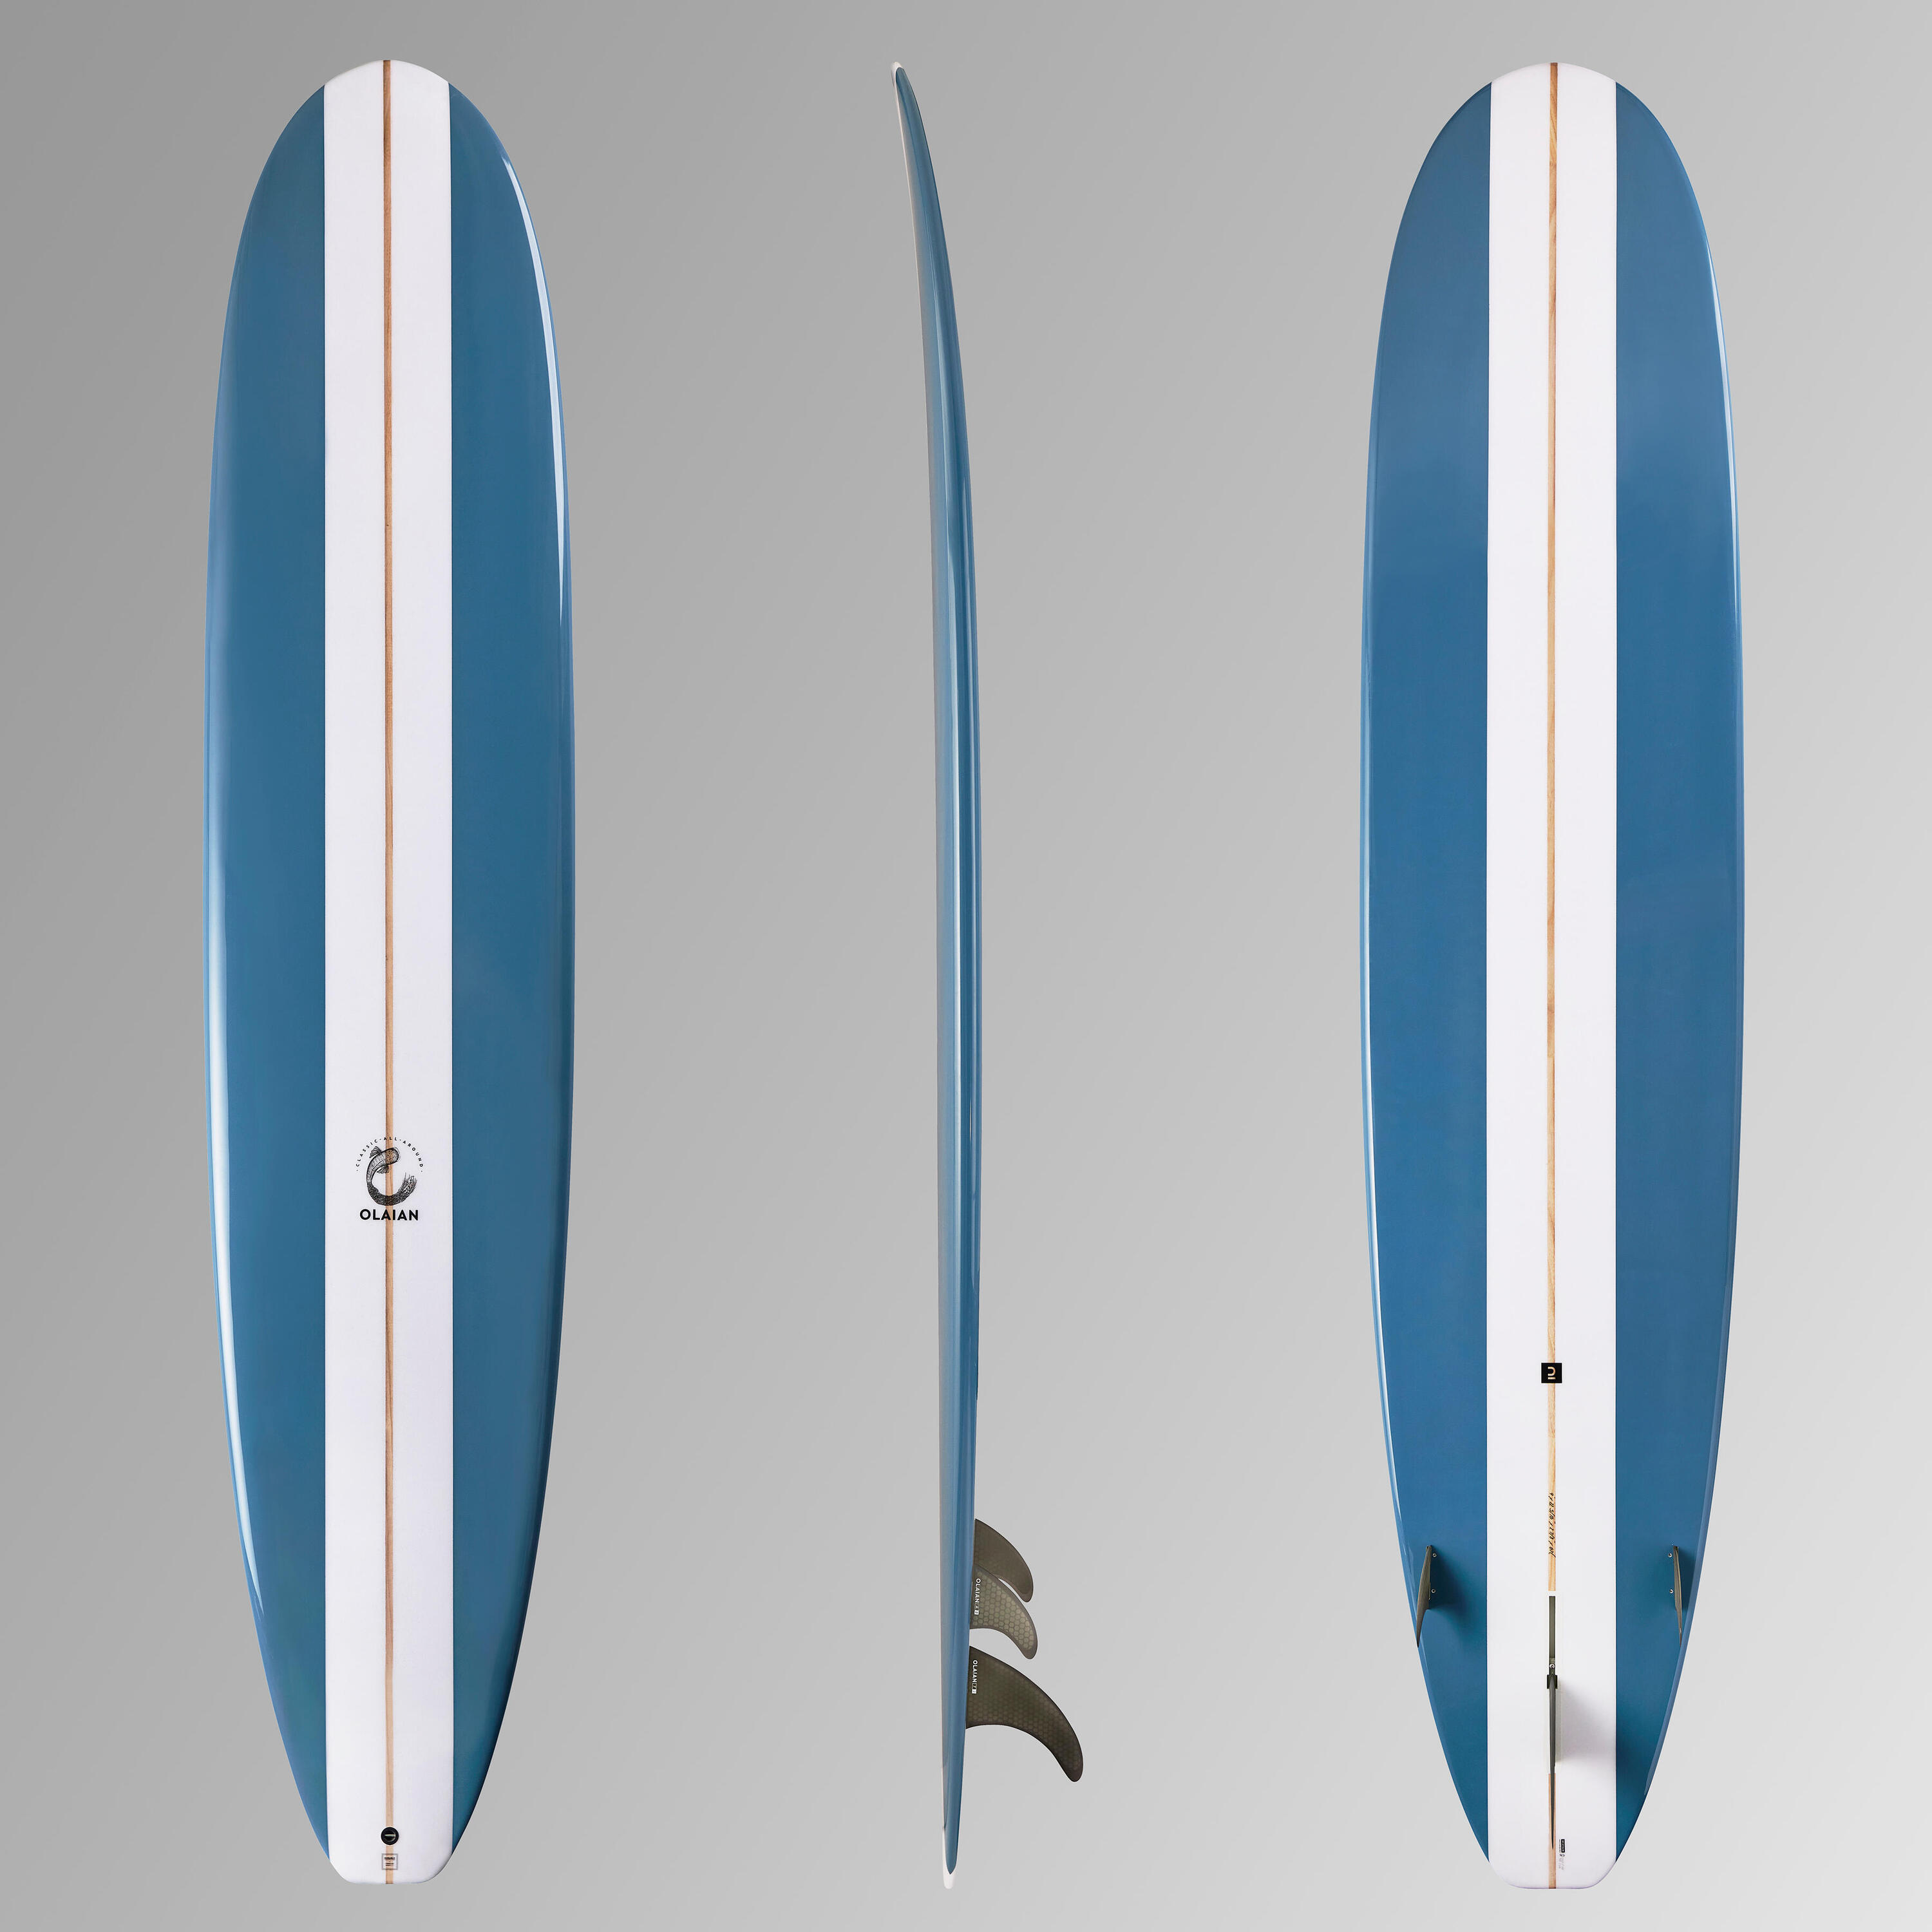 OLAIAN LONGBOARD 900 9' 67 L . Comes with 2+1 set-up 8" central fin.